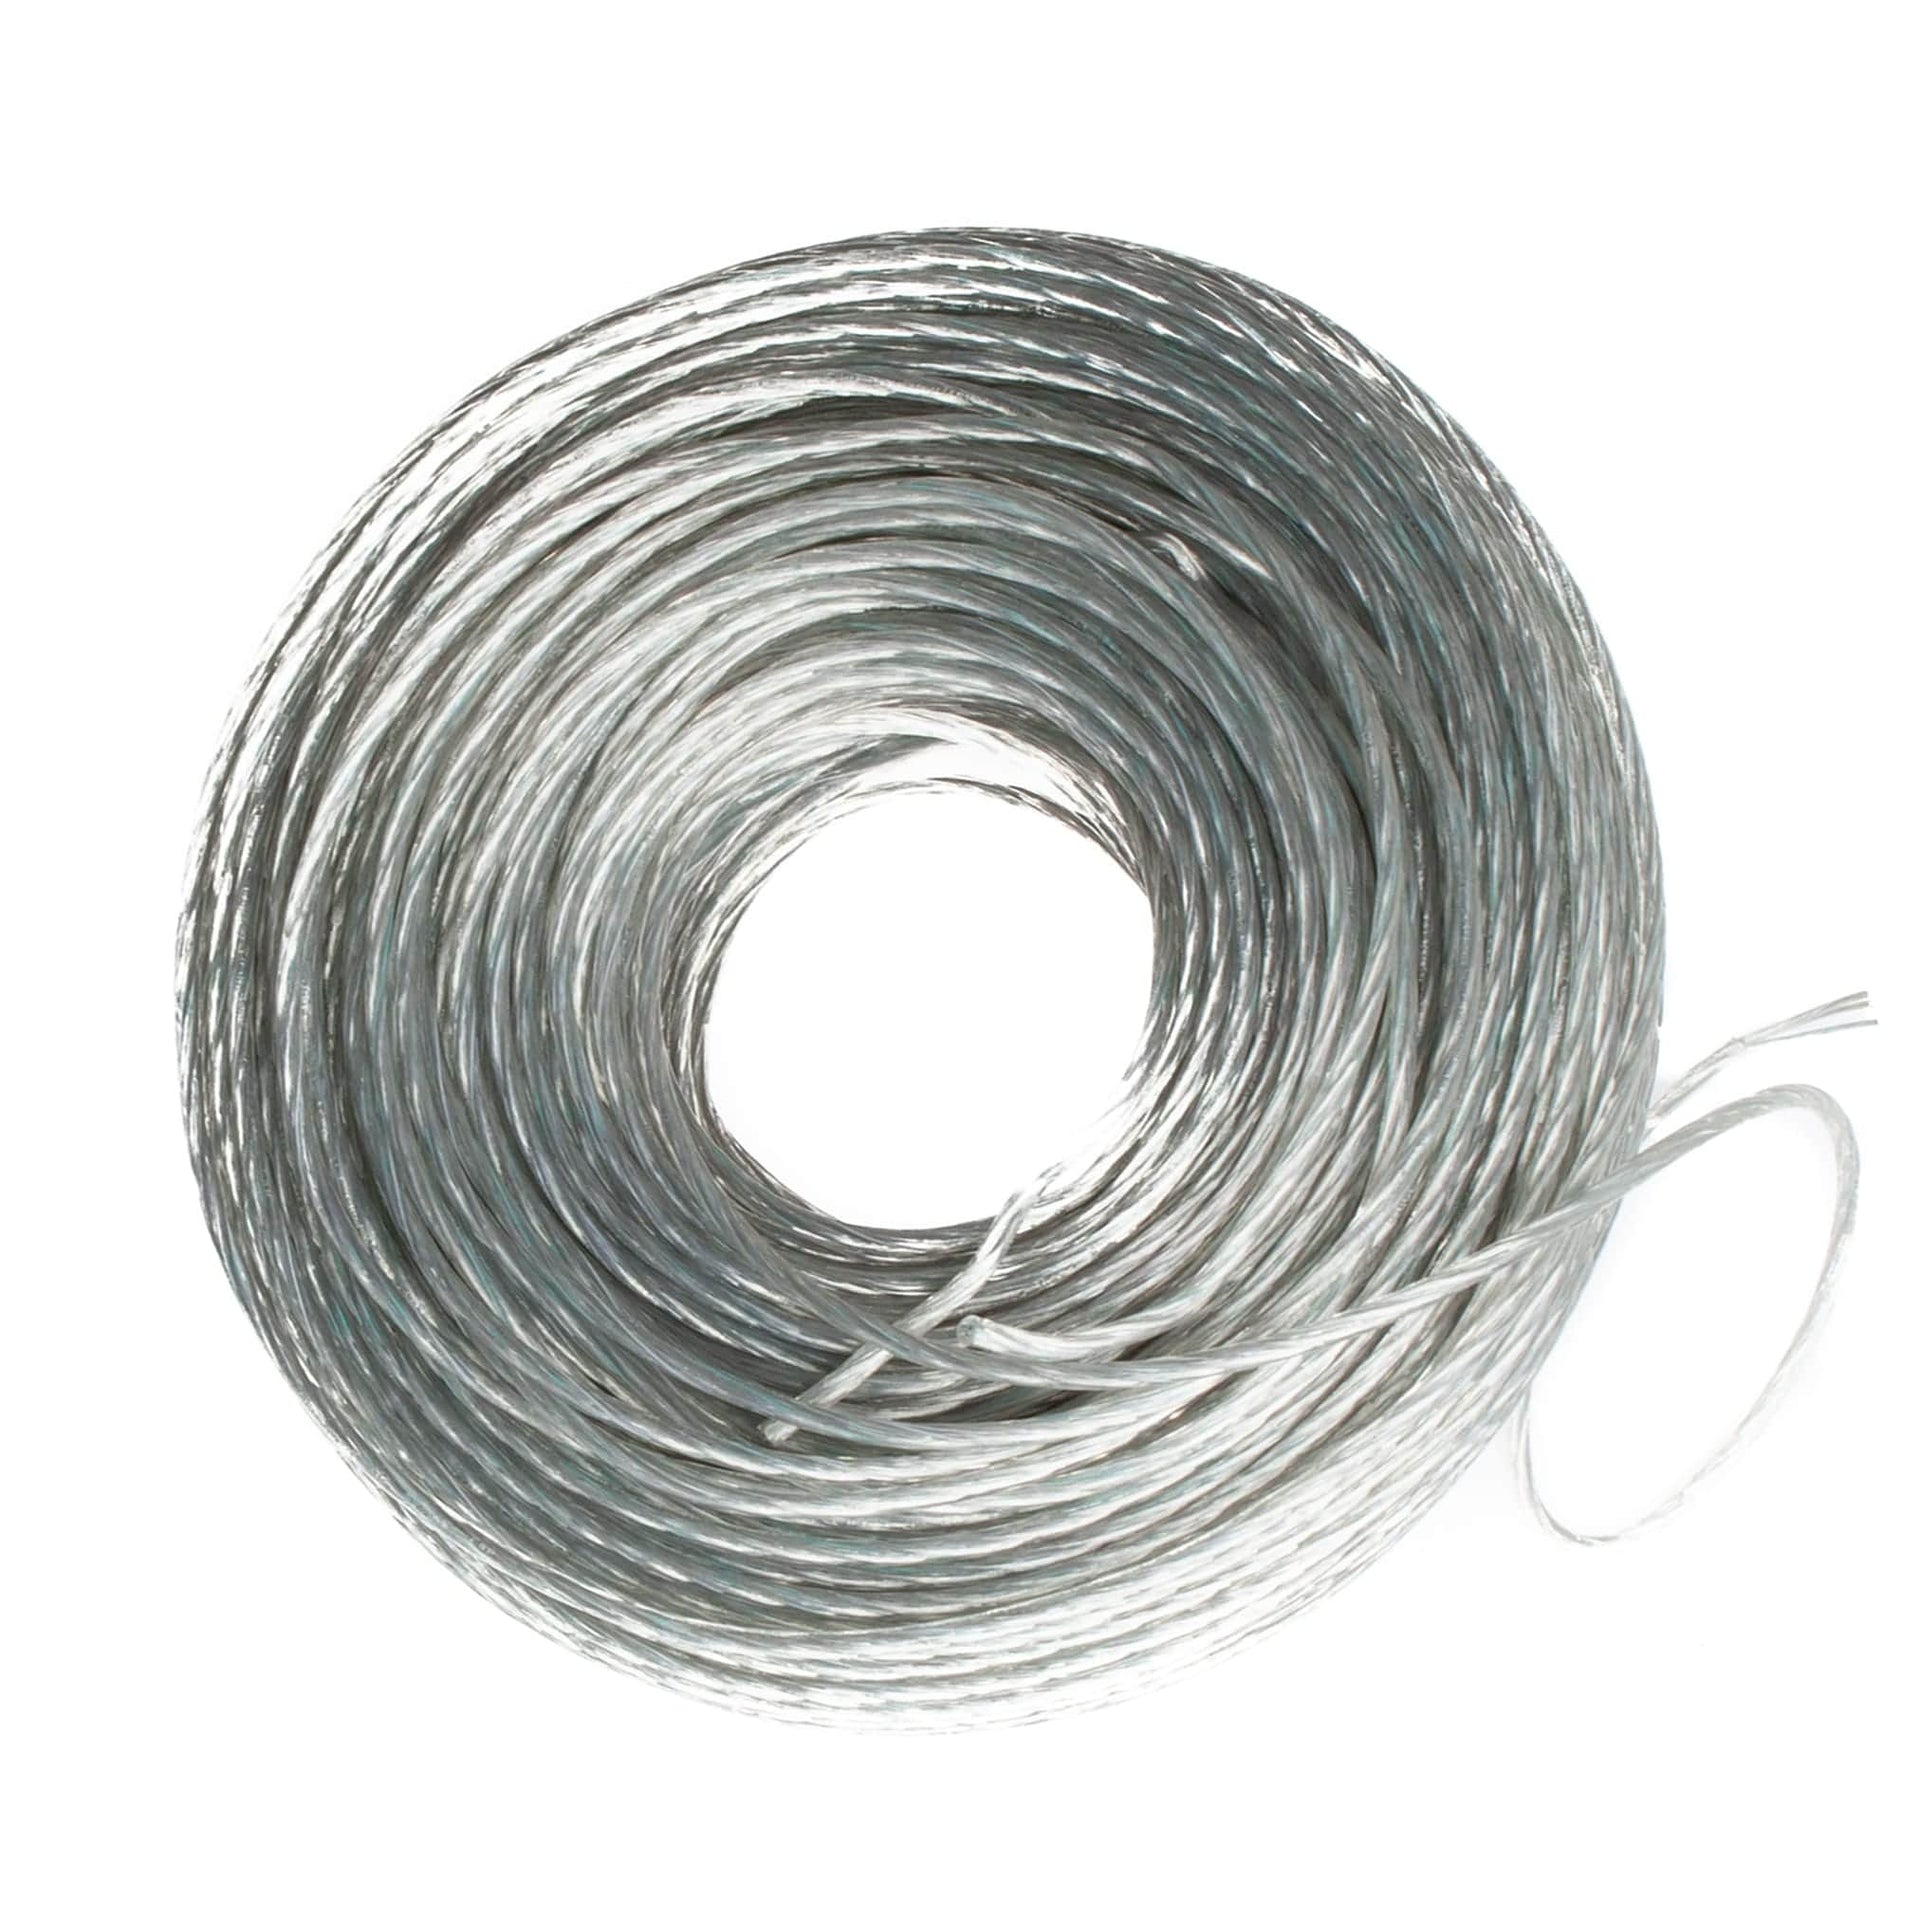 Pendant Clear Round Cord 18/3, SVT Pulley Cord